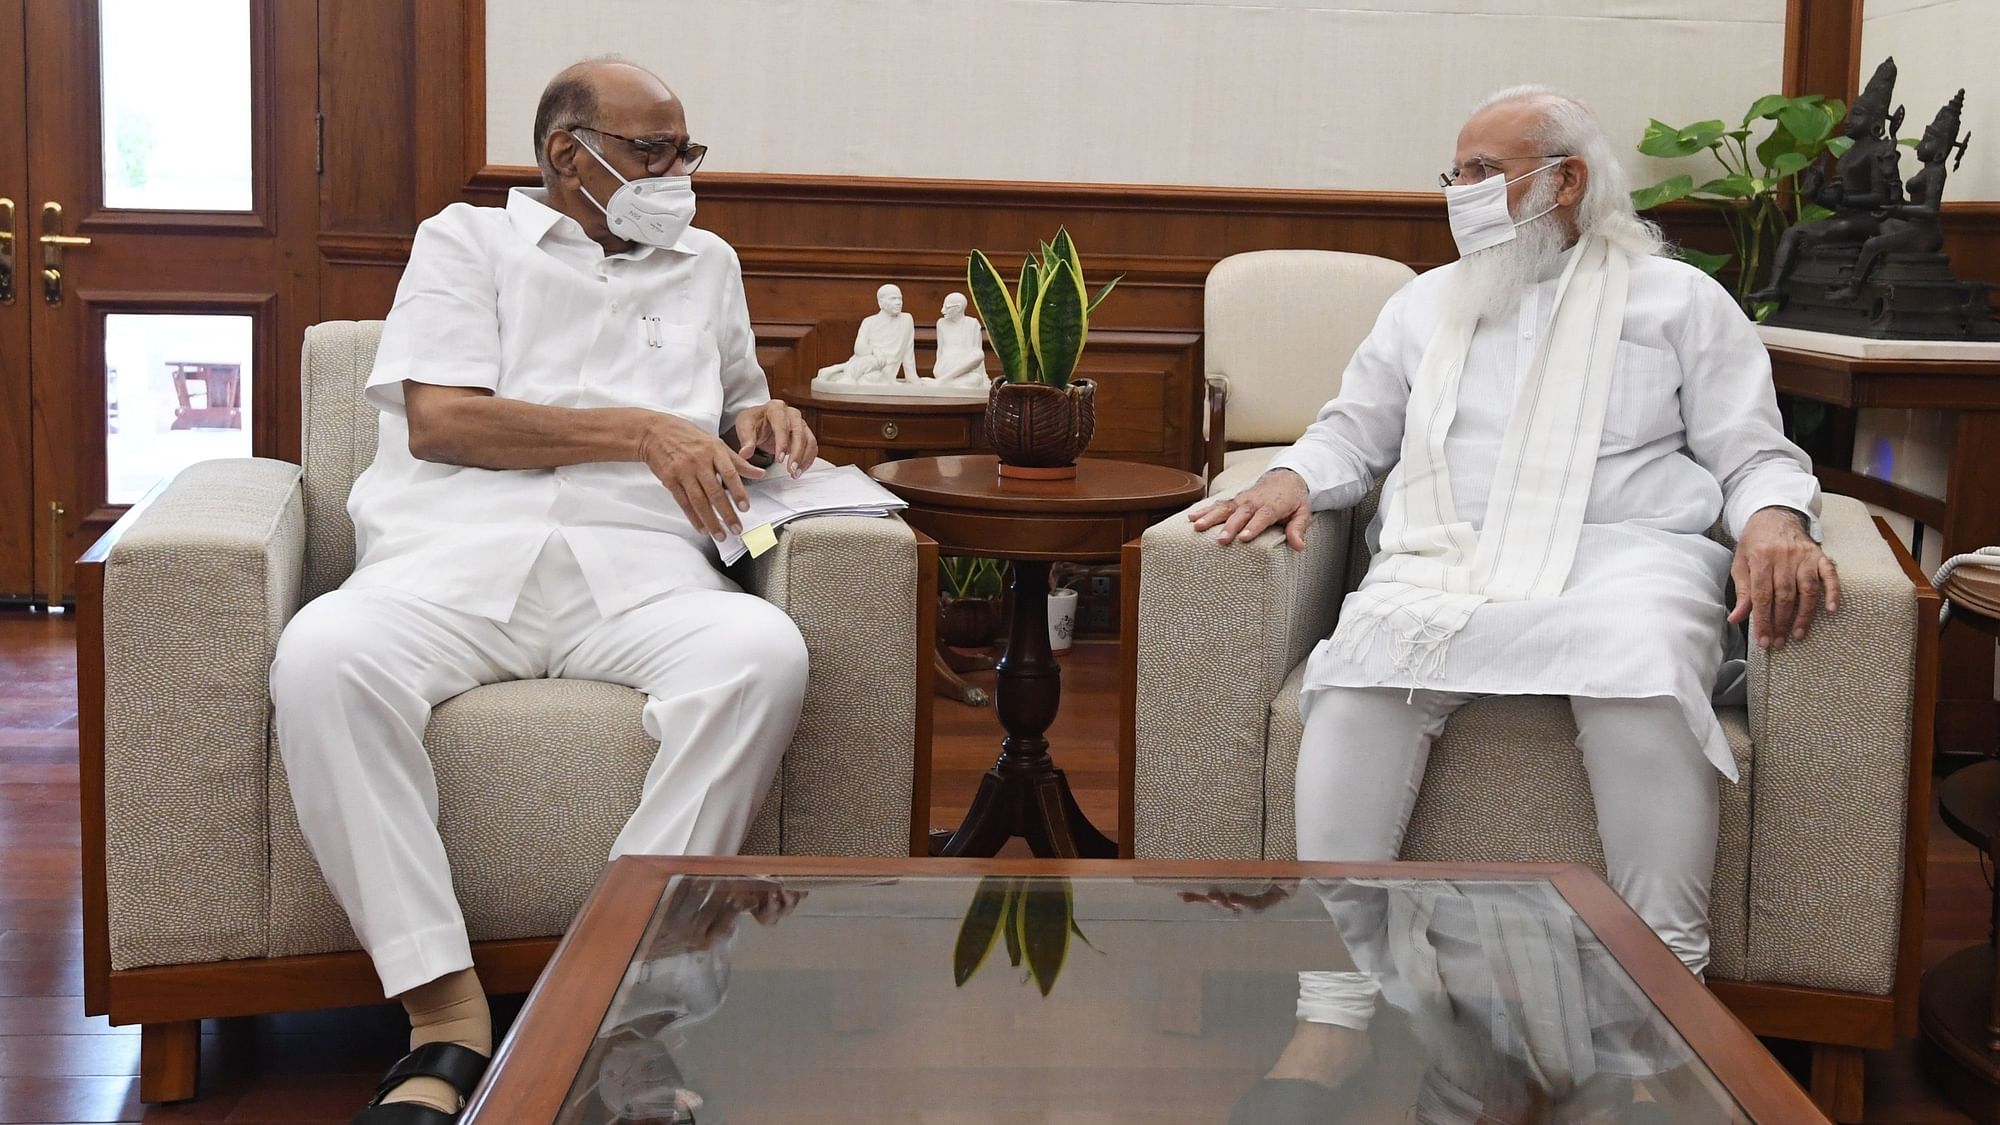 <div class="paragraphs"><p>The meeting between PM Modi and Sharad Pawar comes amid speculations around multiple political developments.</p></div>